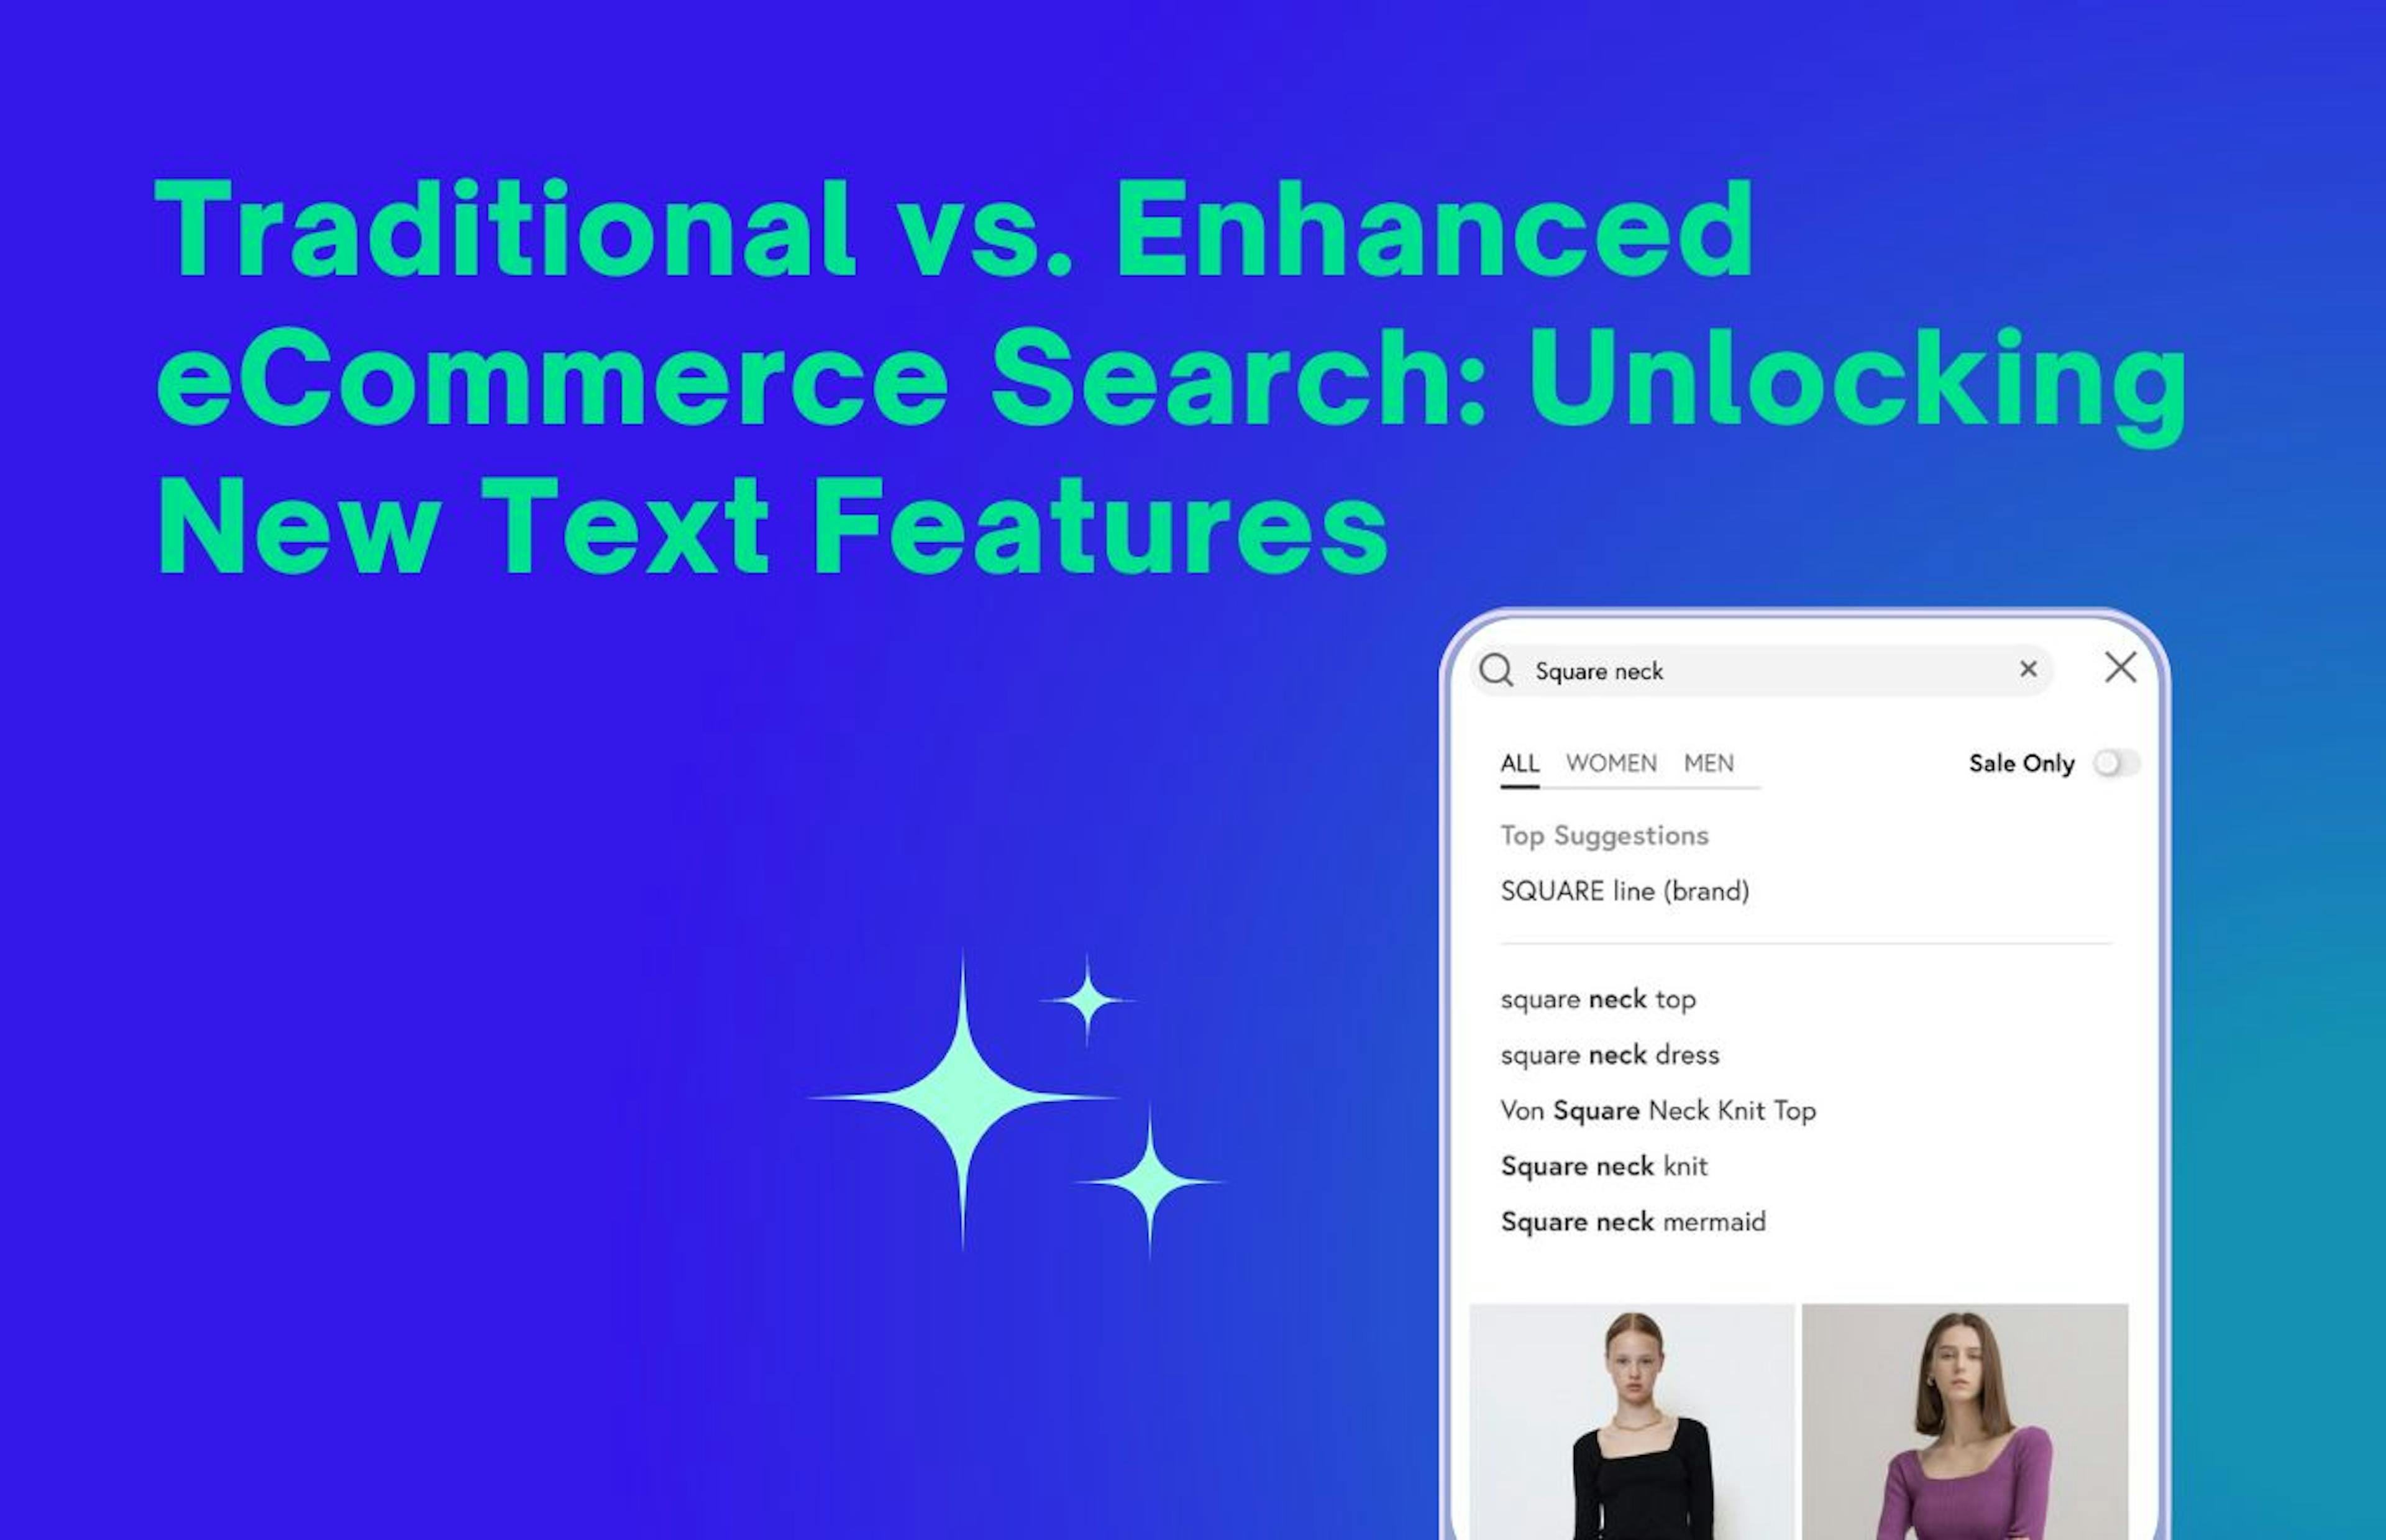 /traditional-vs-enhanced-ecommerce-search-unlocking-new-text-features feature image